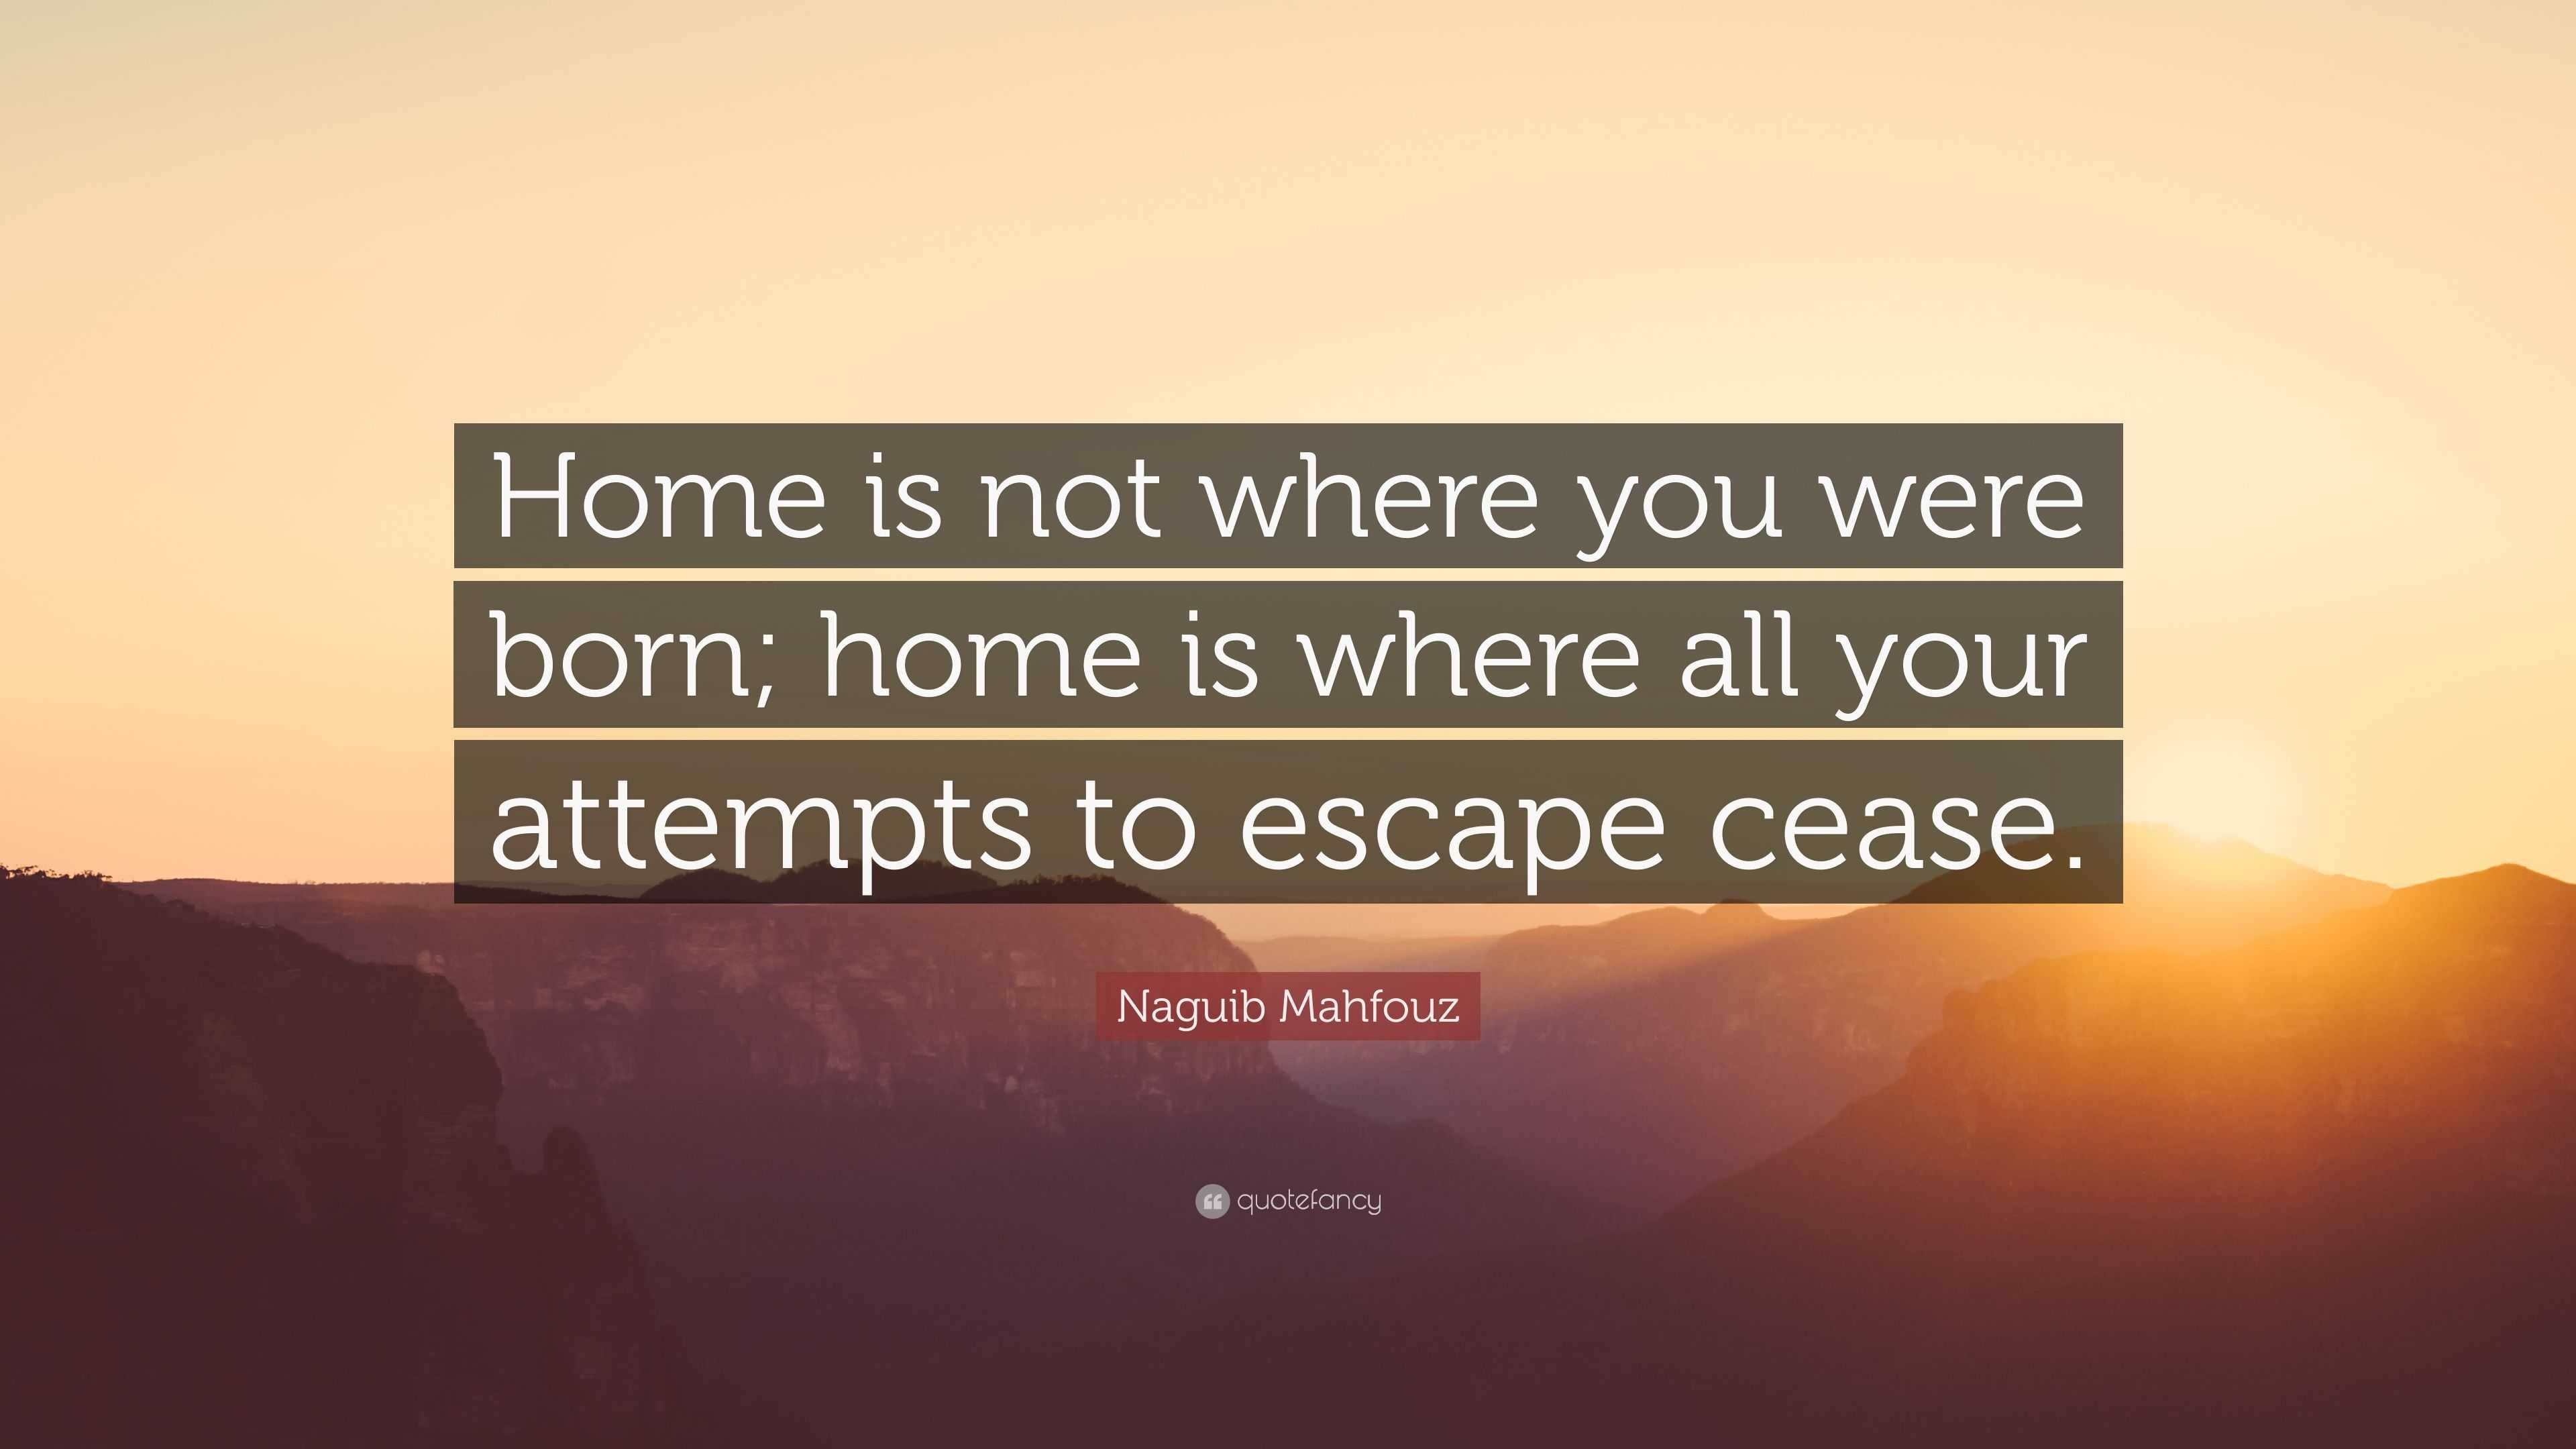 Home is not where you were born; home is where all your attempts